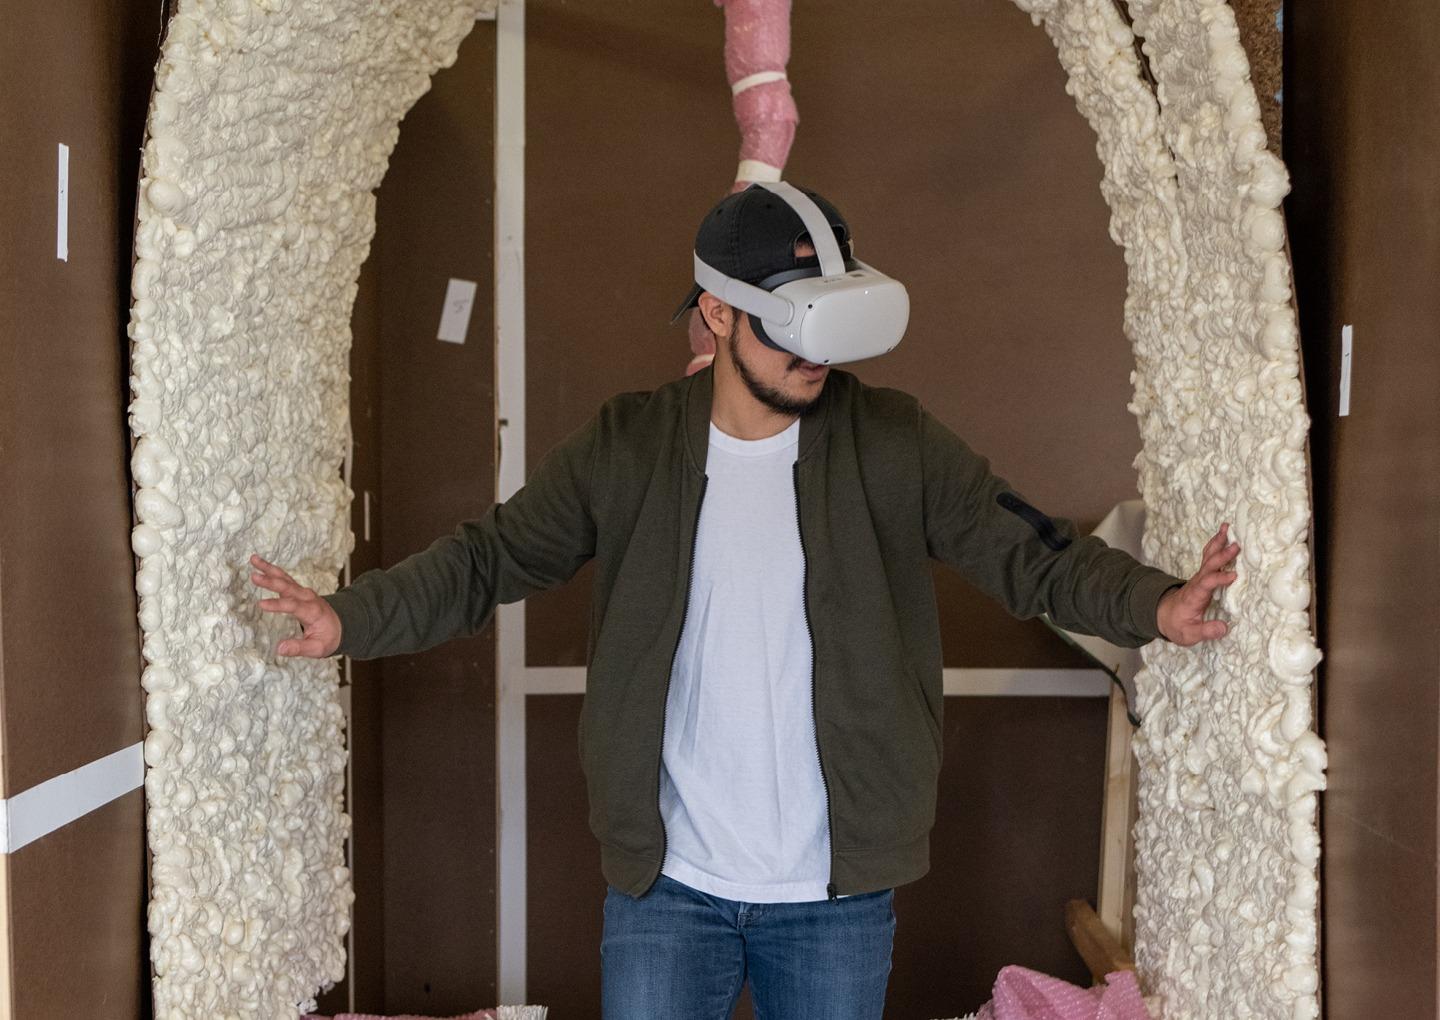 Yugo Naito, MFE ’21, experiences a mixed reality display at the 2022 Student Expo. Undergraduate and graduate students from the Scripps College of Communication created a sensory experience that imitated walking inside a whale. Photo by Ben Wirtz Siegel, BSVC '02